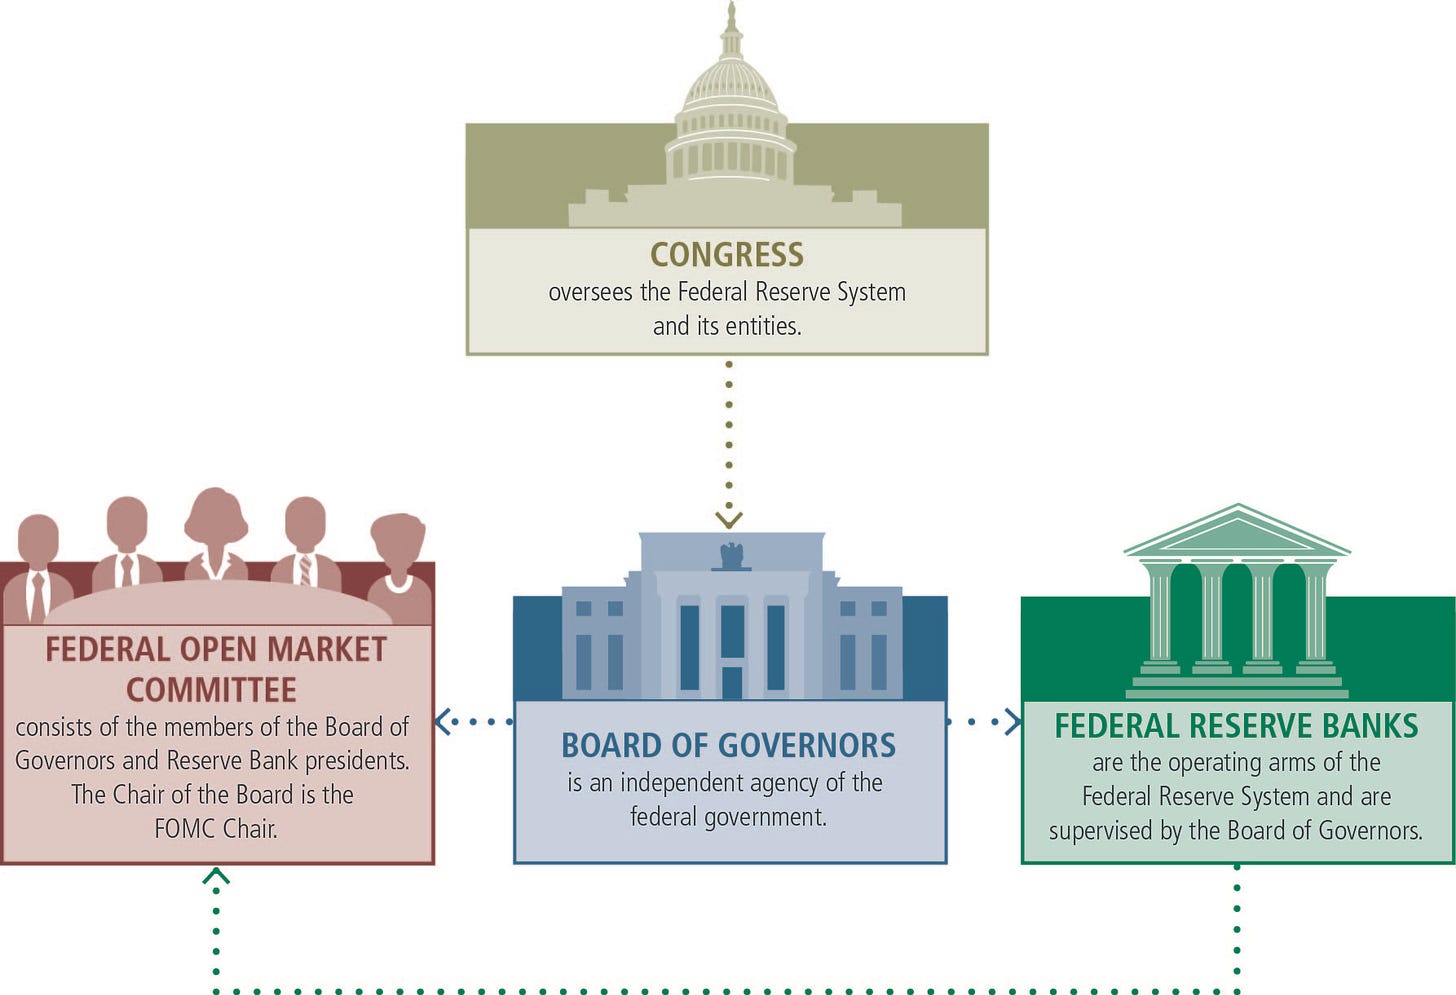 CONGRESS graphic positioned above the three key Federal Reserve entities' graphics: 'CONGRESS oversees the Federal Reserve System and its entities.' A dotted arrow leads down to the BOARD graphic: 'BOARD OF GOVERNORS is an independent agency of the federal government.' A dotted arrow leads right from the BOARD graphic to the BANKS graphic: 'FEDERAL RESERVE BANKS are the operating arms of the Federal Reserve System and are supervised by the Board of Governors.' Dotted arrows lead left from the BOARD and BANKS graphics to the FOMC graphic: 'FEDERAL OPEN MARKET COMMITTEE consists of the members of the Board of Governors and Reserve Bank presidents. The Chair of the Board is the FOMC Chair.